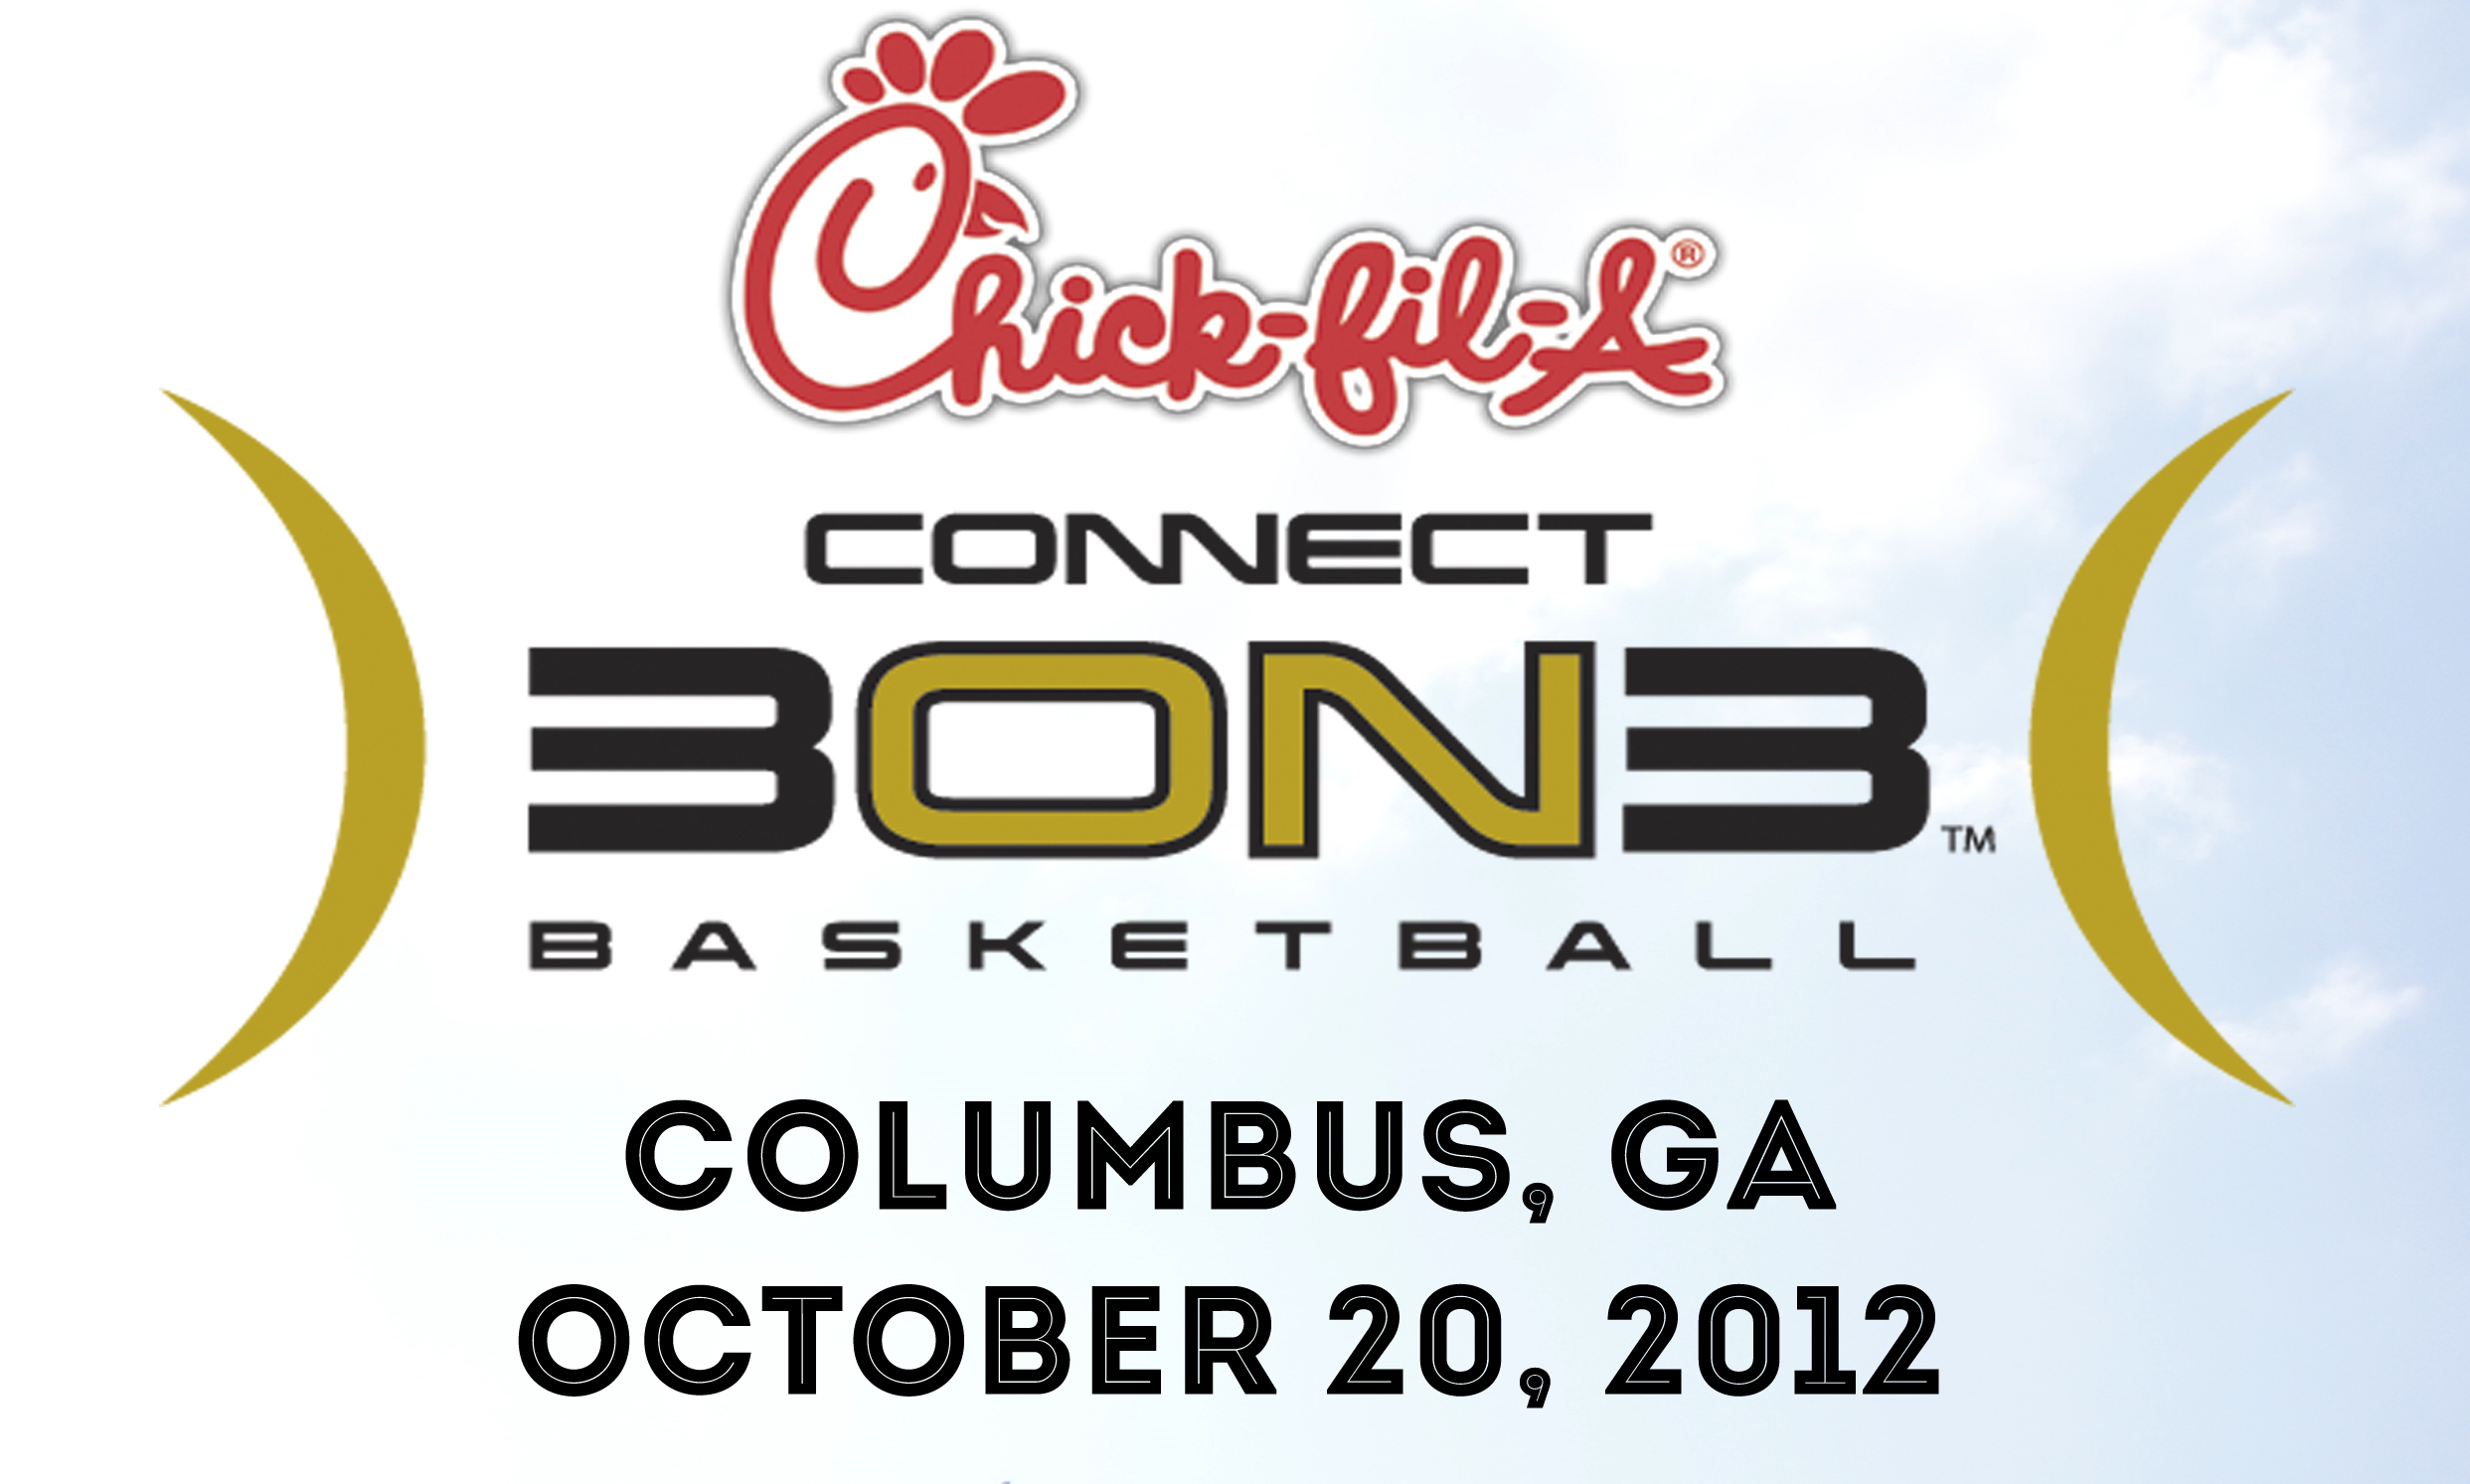 Chick-fil-A Connect 3on3 Basketball Tournament @ The Greater Columbus Fair